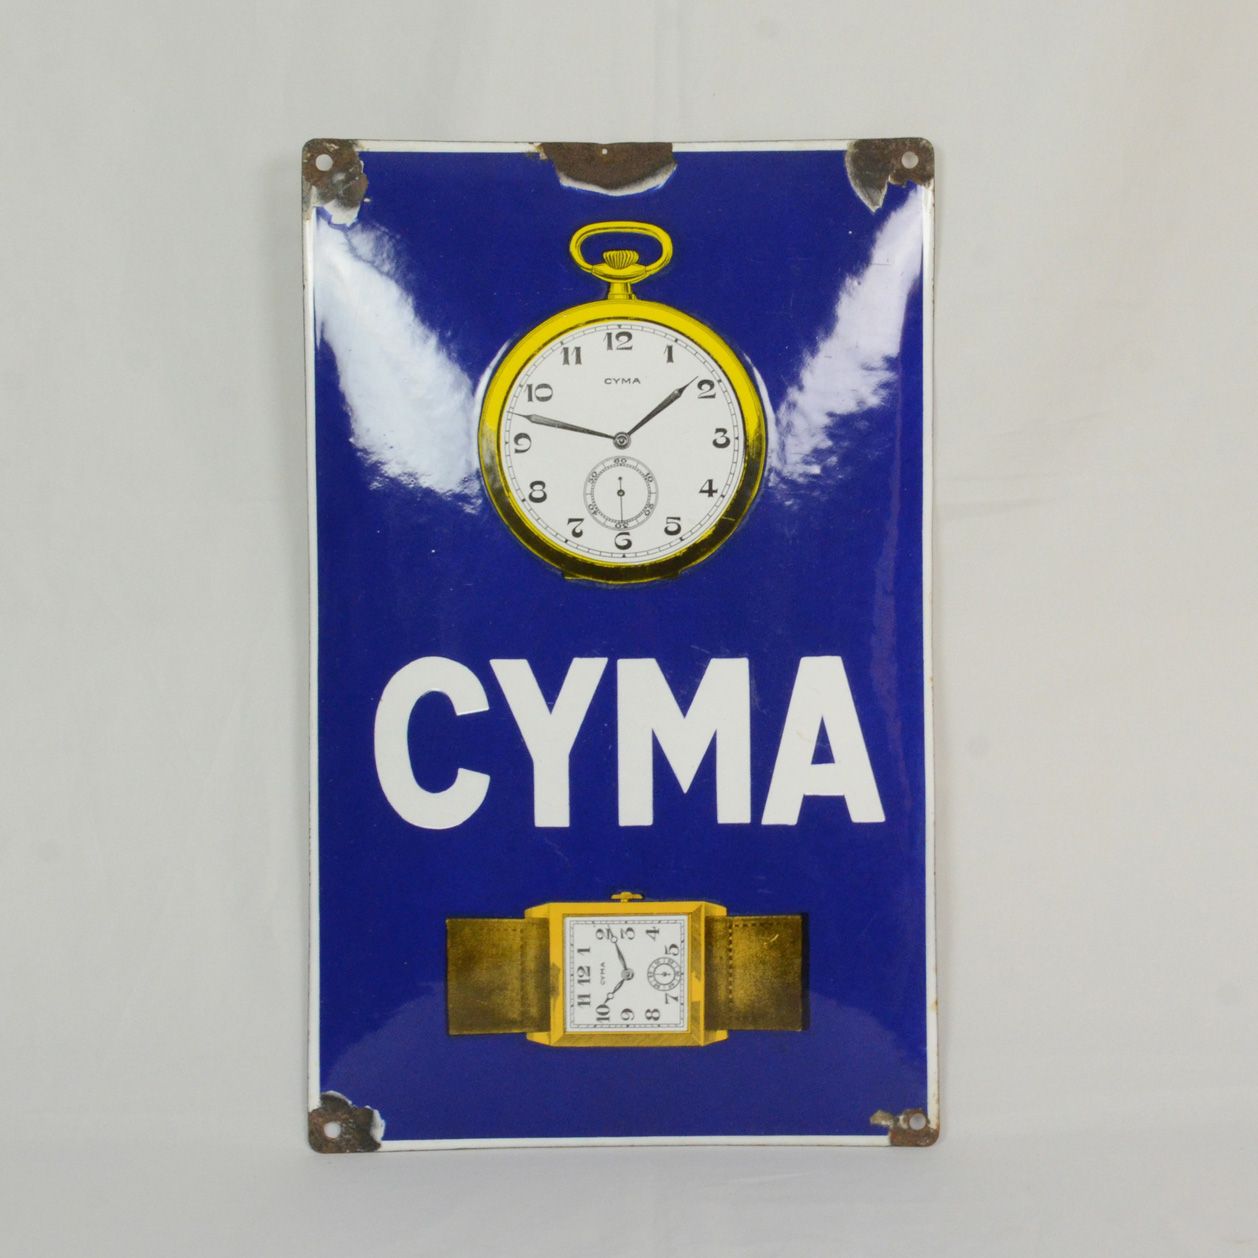 Curved Enamel Sign CYMA This curved CYMA enamel sign has 4 mounting holes and on&hellip;